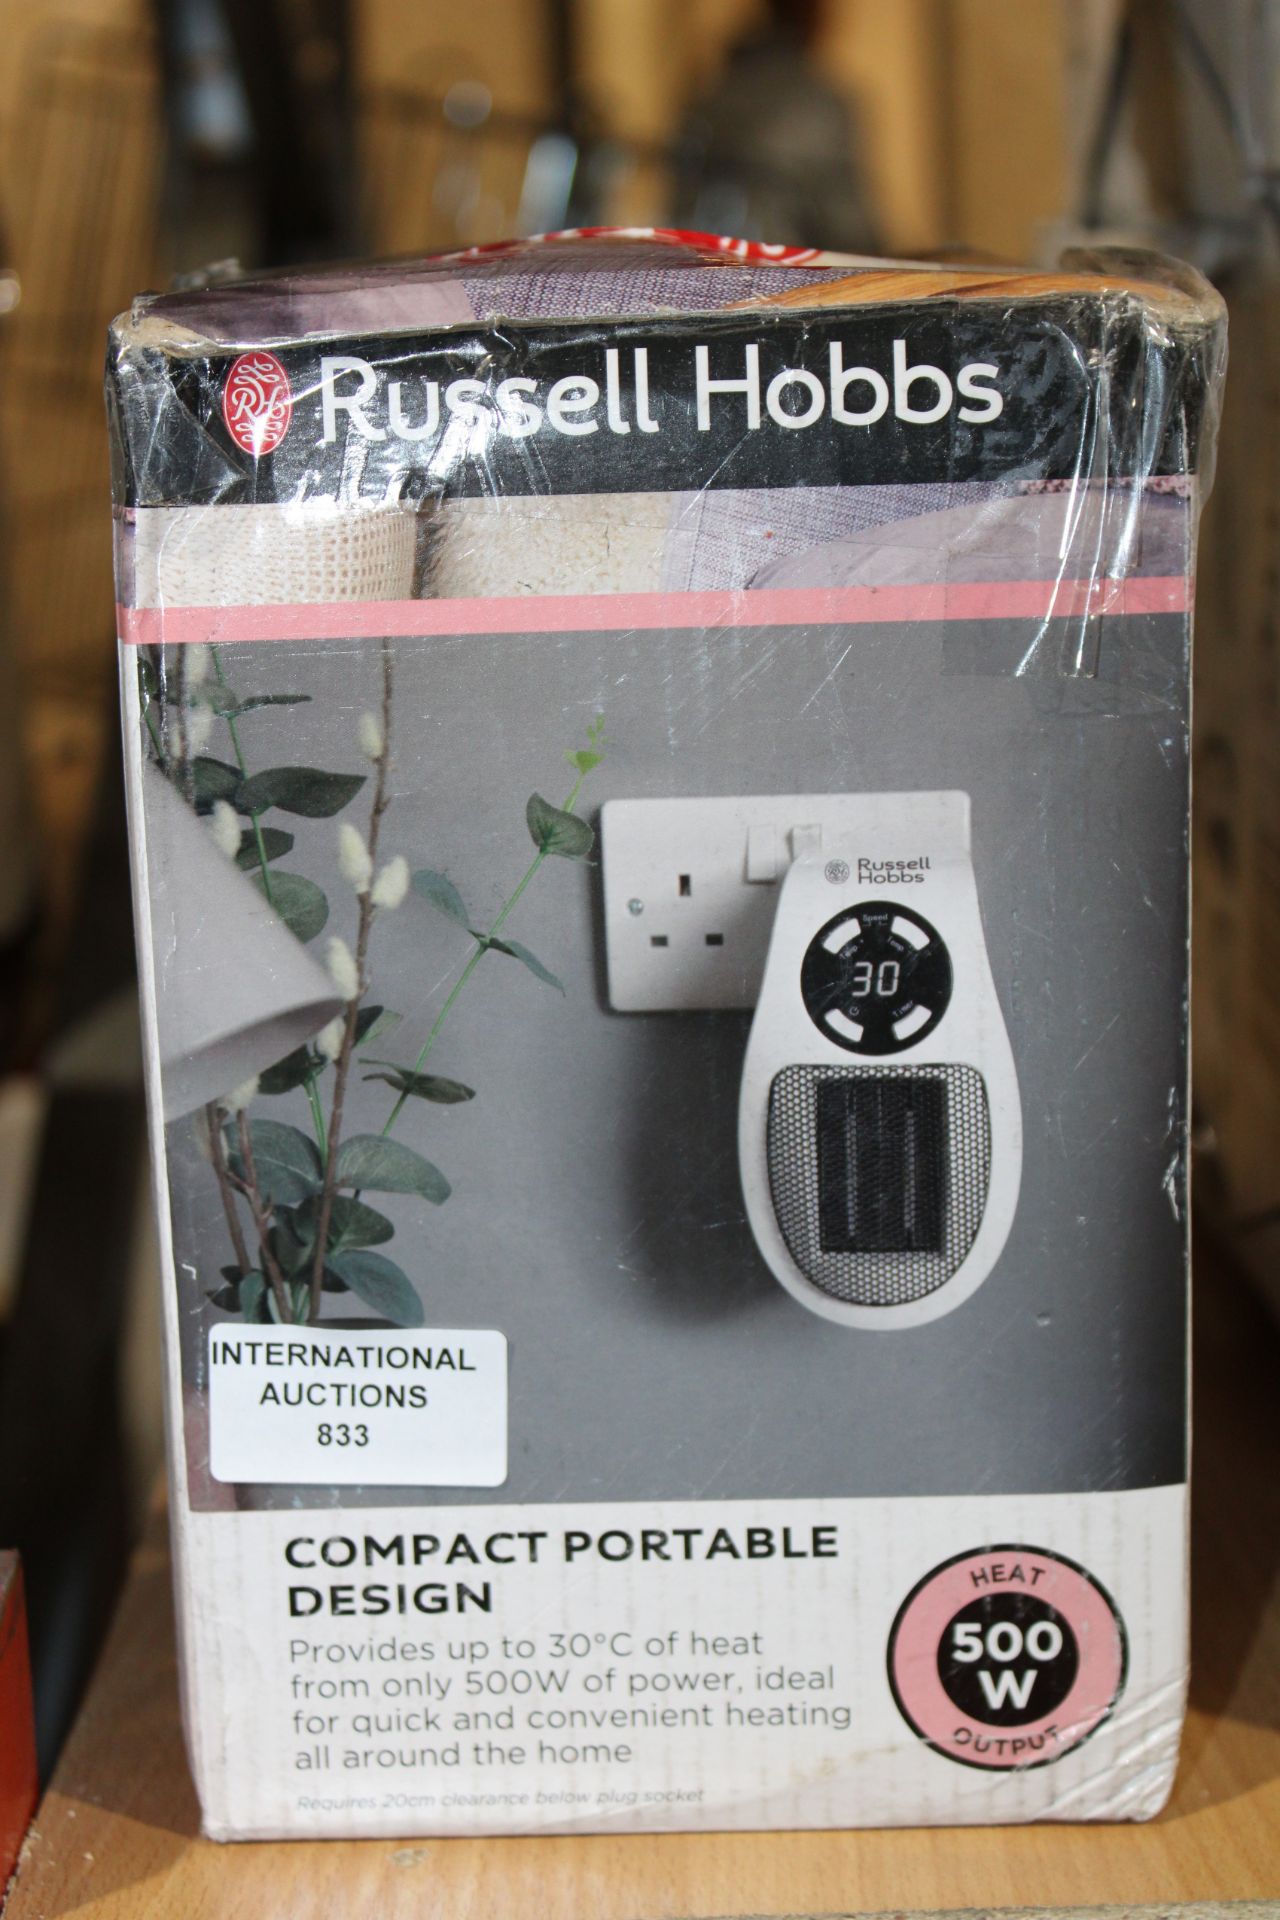 BOXED RUSSELL HOBBS COMPACT PORTABLE DESIGN PORTABLE PLUG IN HEATER